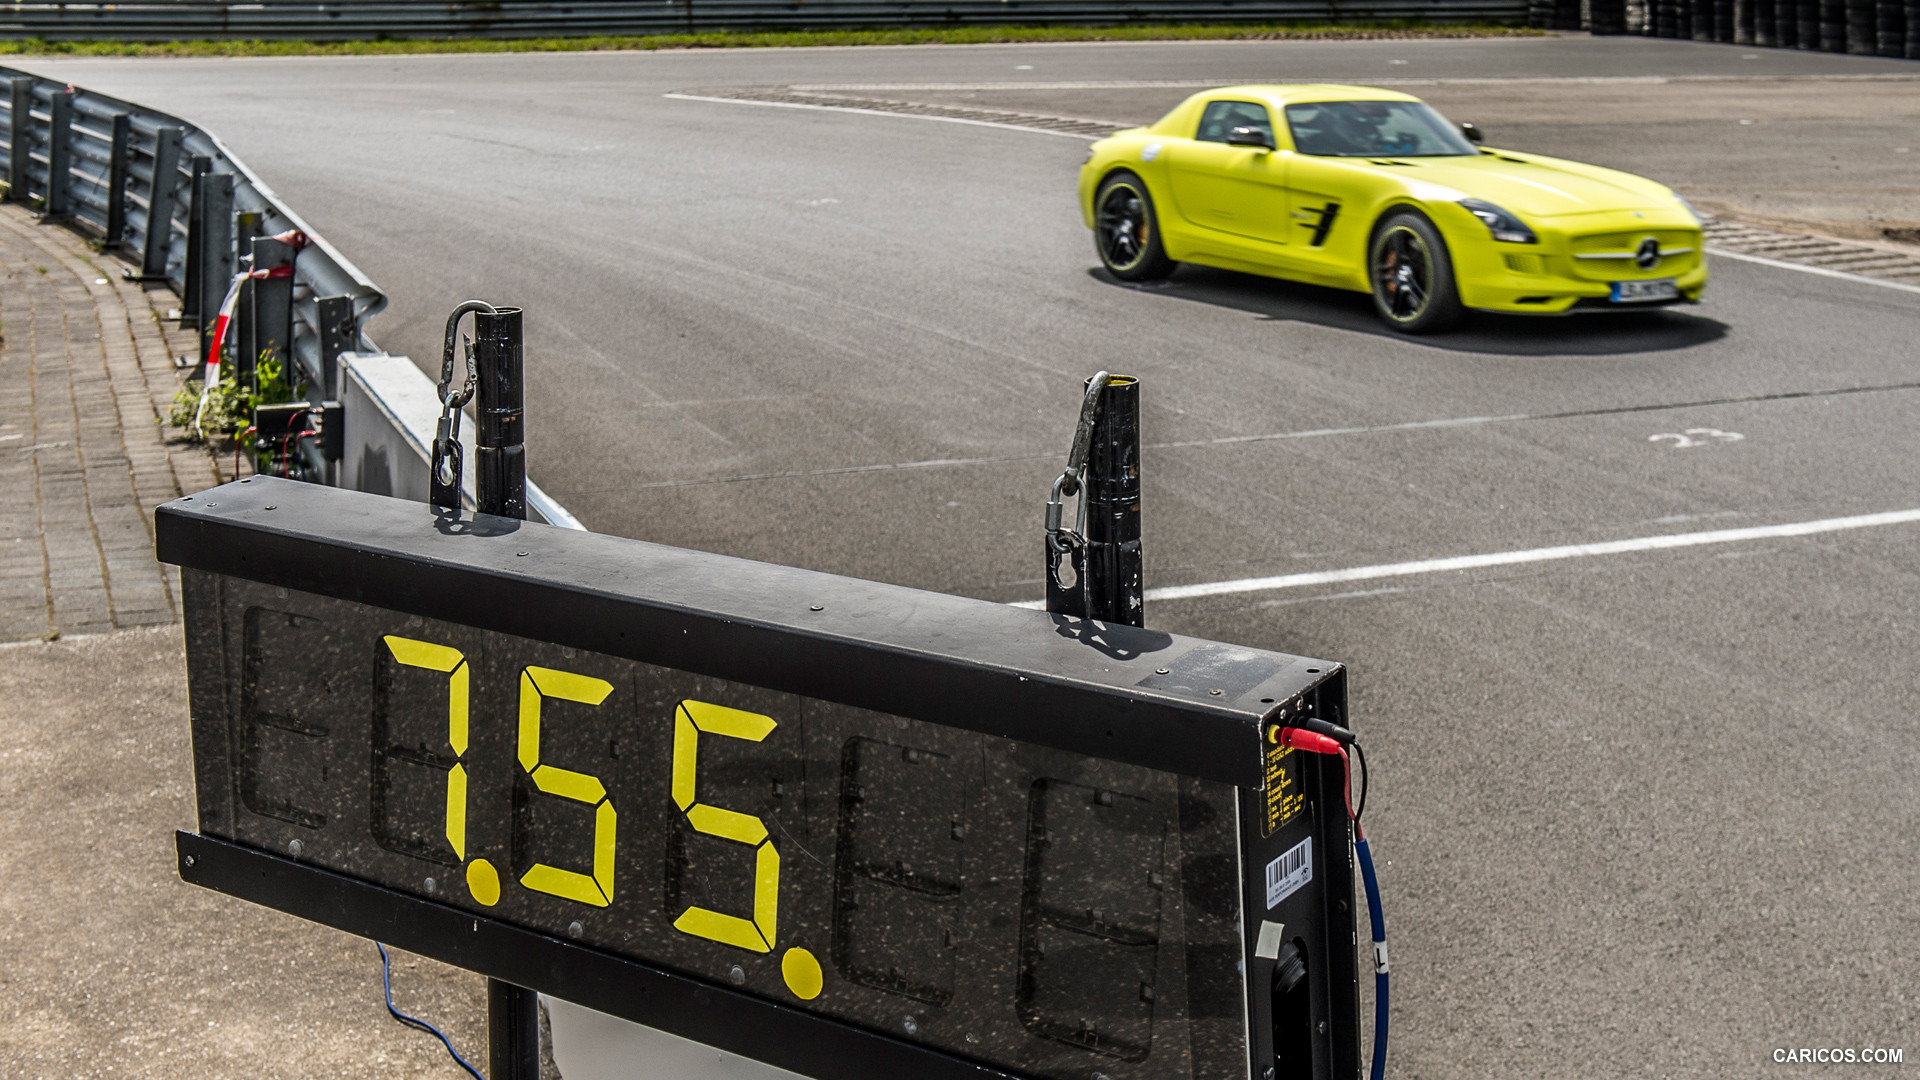 2014 Mercedes-Benz SLS AMG Coupe Electric Drive, Yellow at Nürburgring  Record-setting Lap Time - , #45 of 47